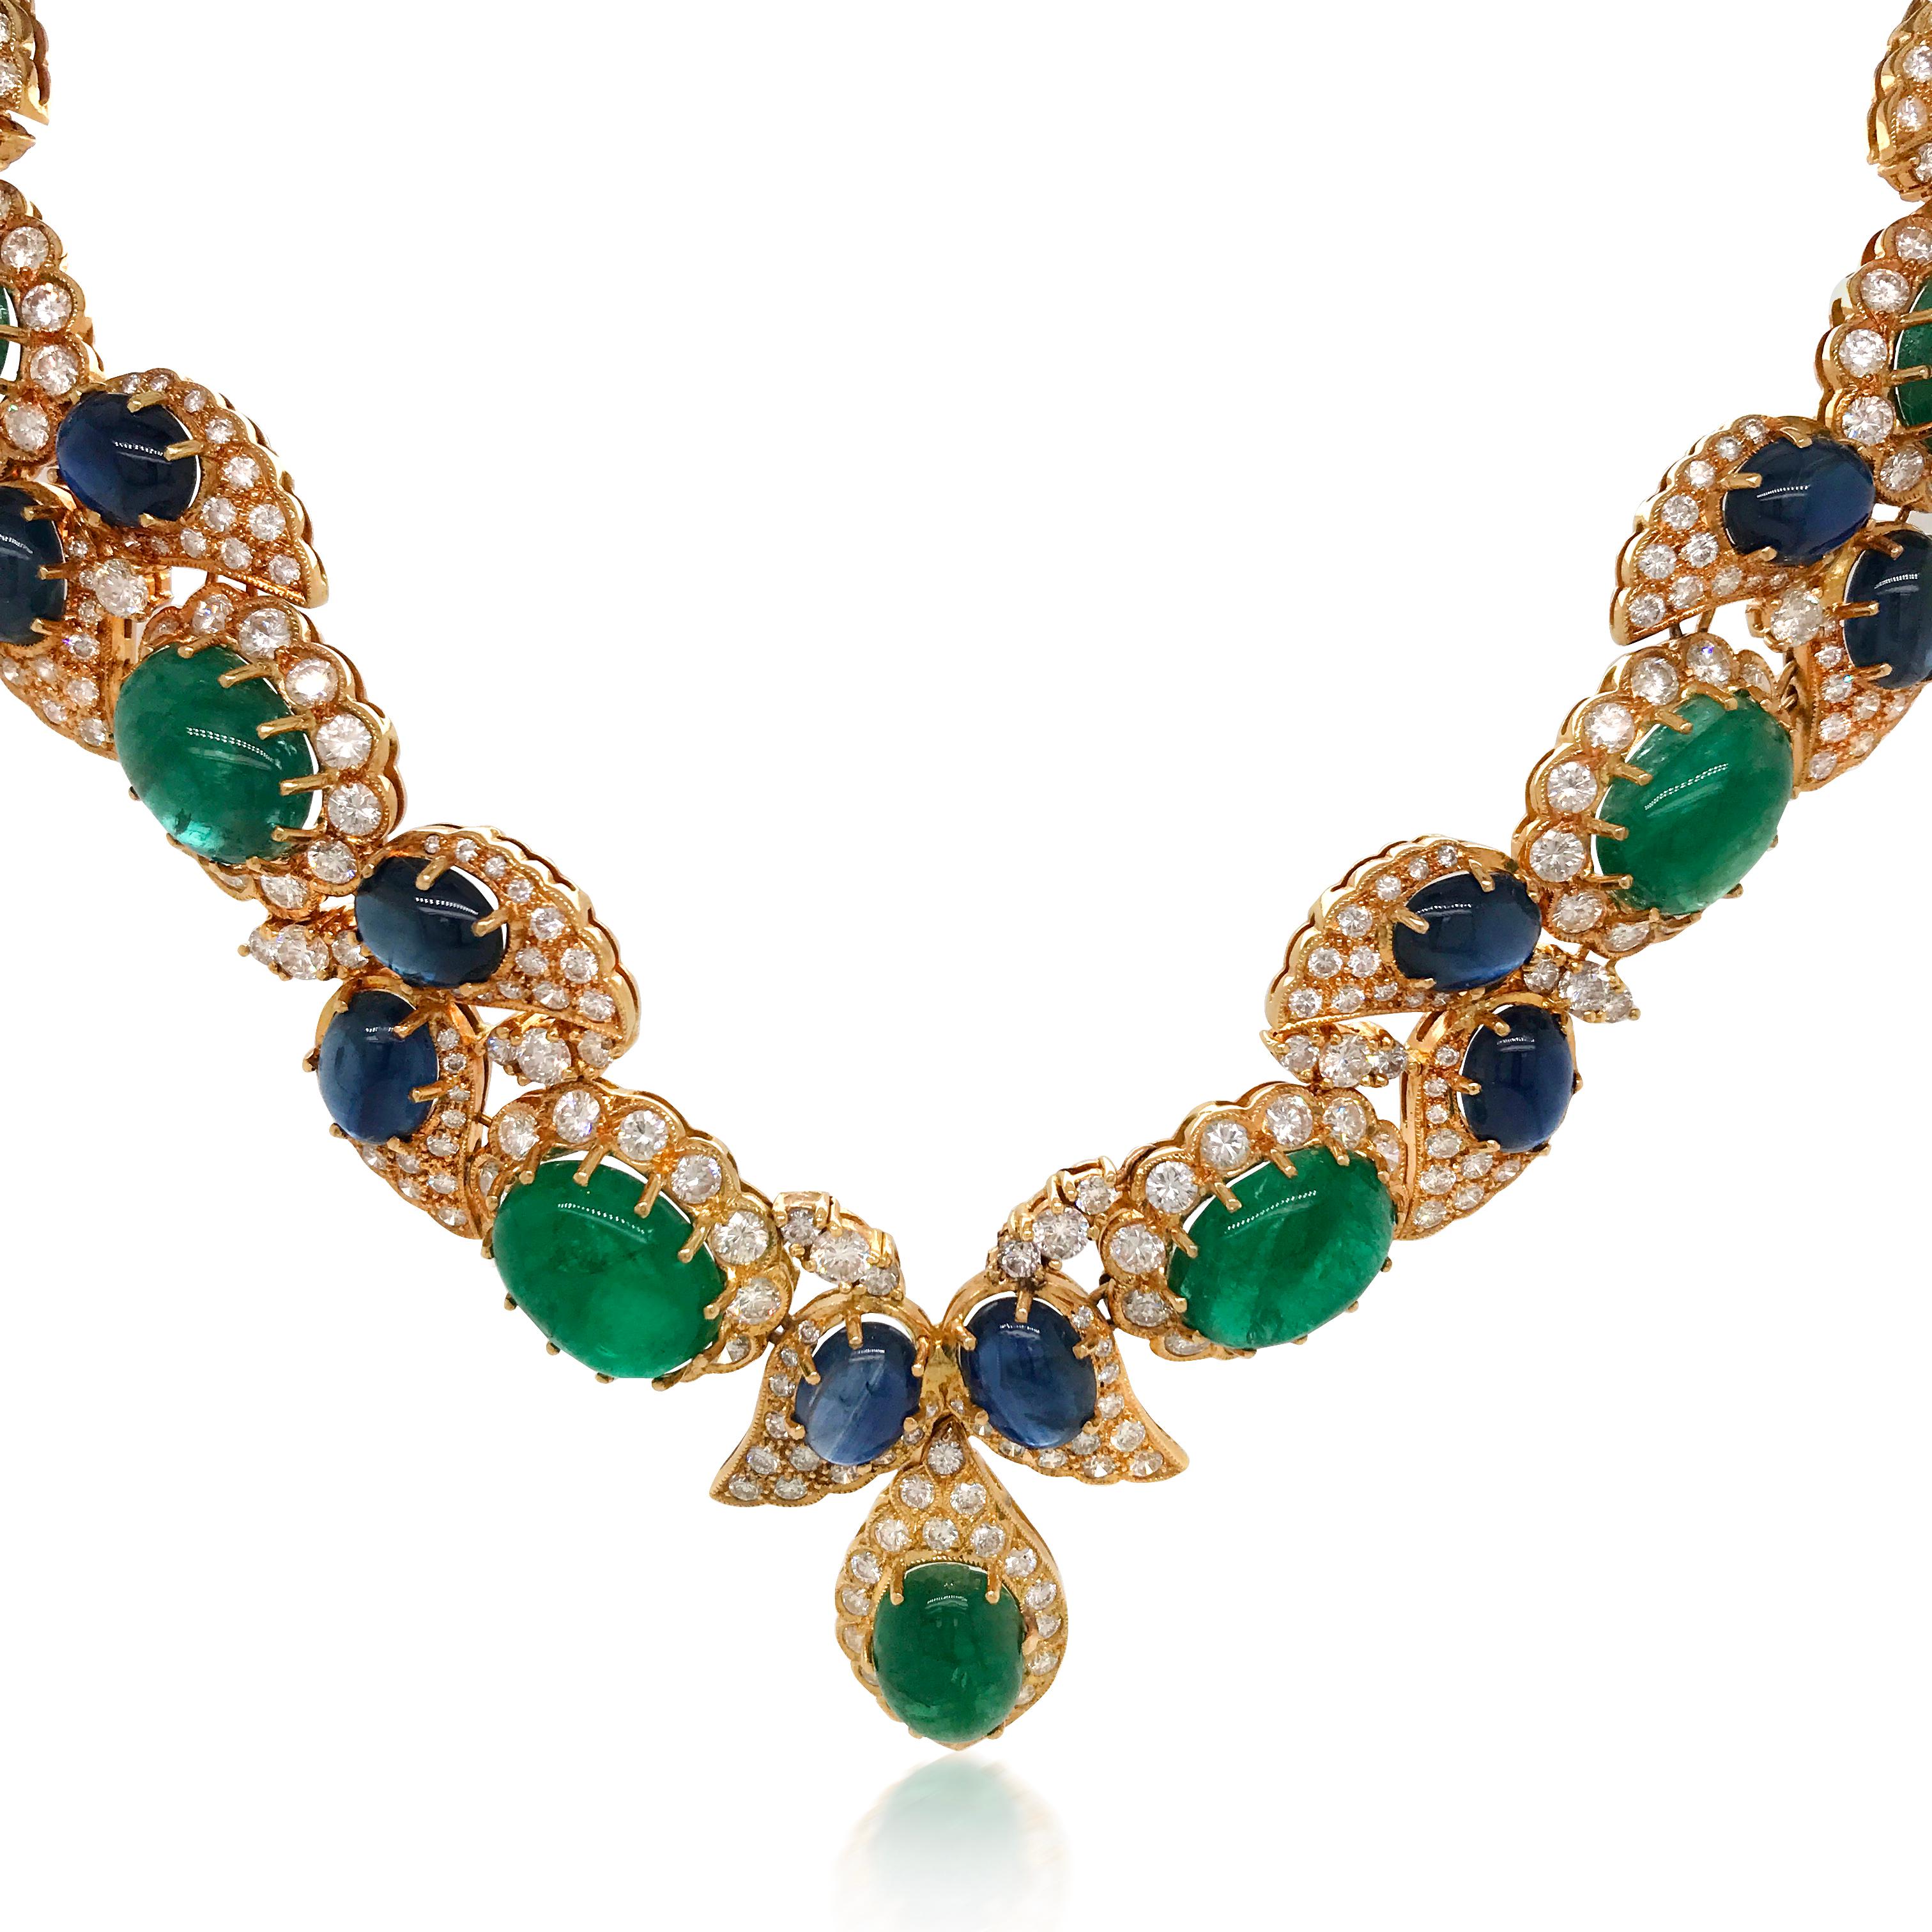 This extravagant and glamorous emerald, blue sapphire and diamond necklace is finely crafted in solid 18K yellow gold, decorated with 15  genuine cabochon-cut emeralds in the center with diamonds halo, further enhanced by 21 wing-motif profiles each